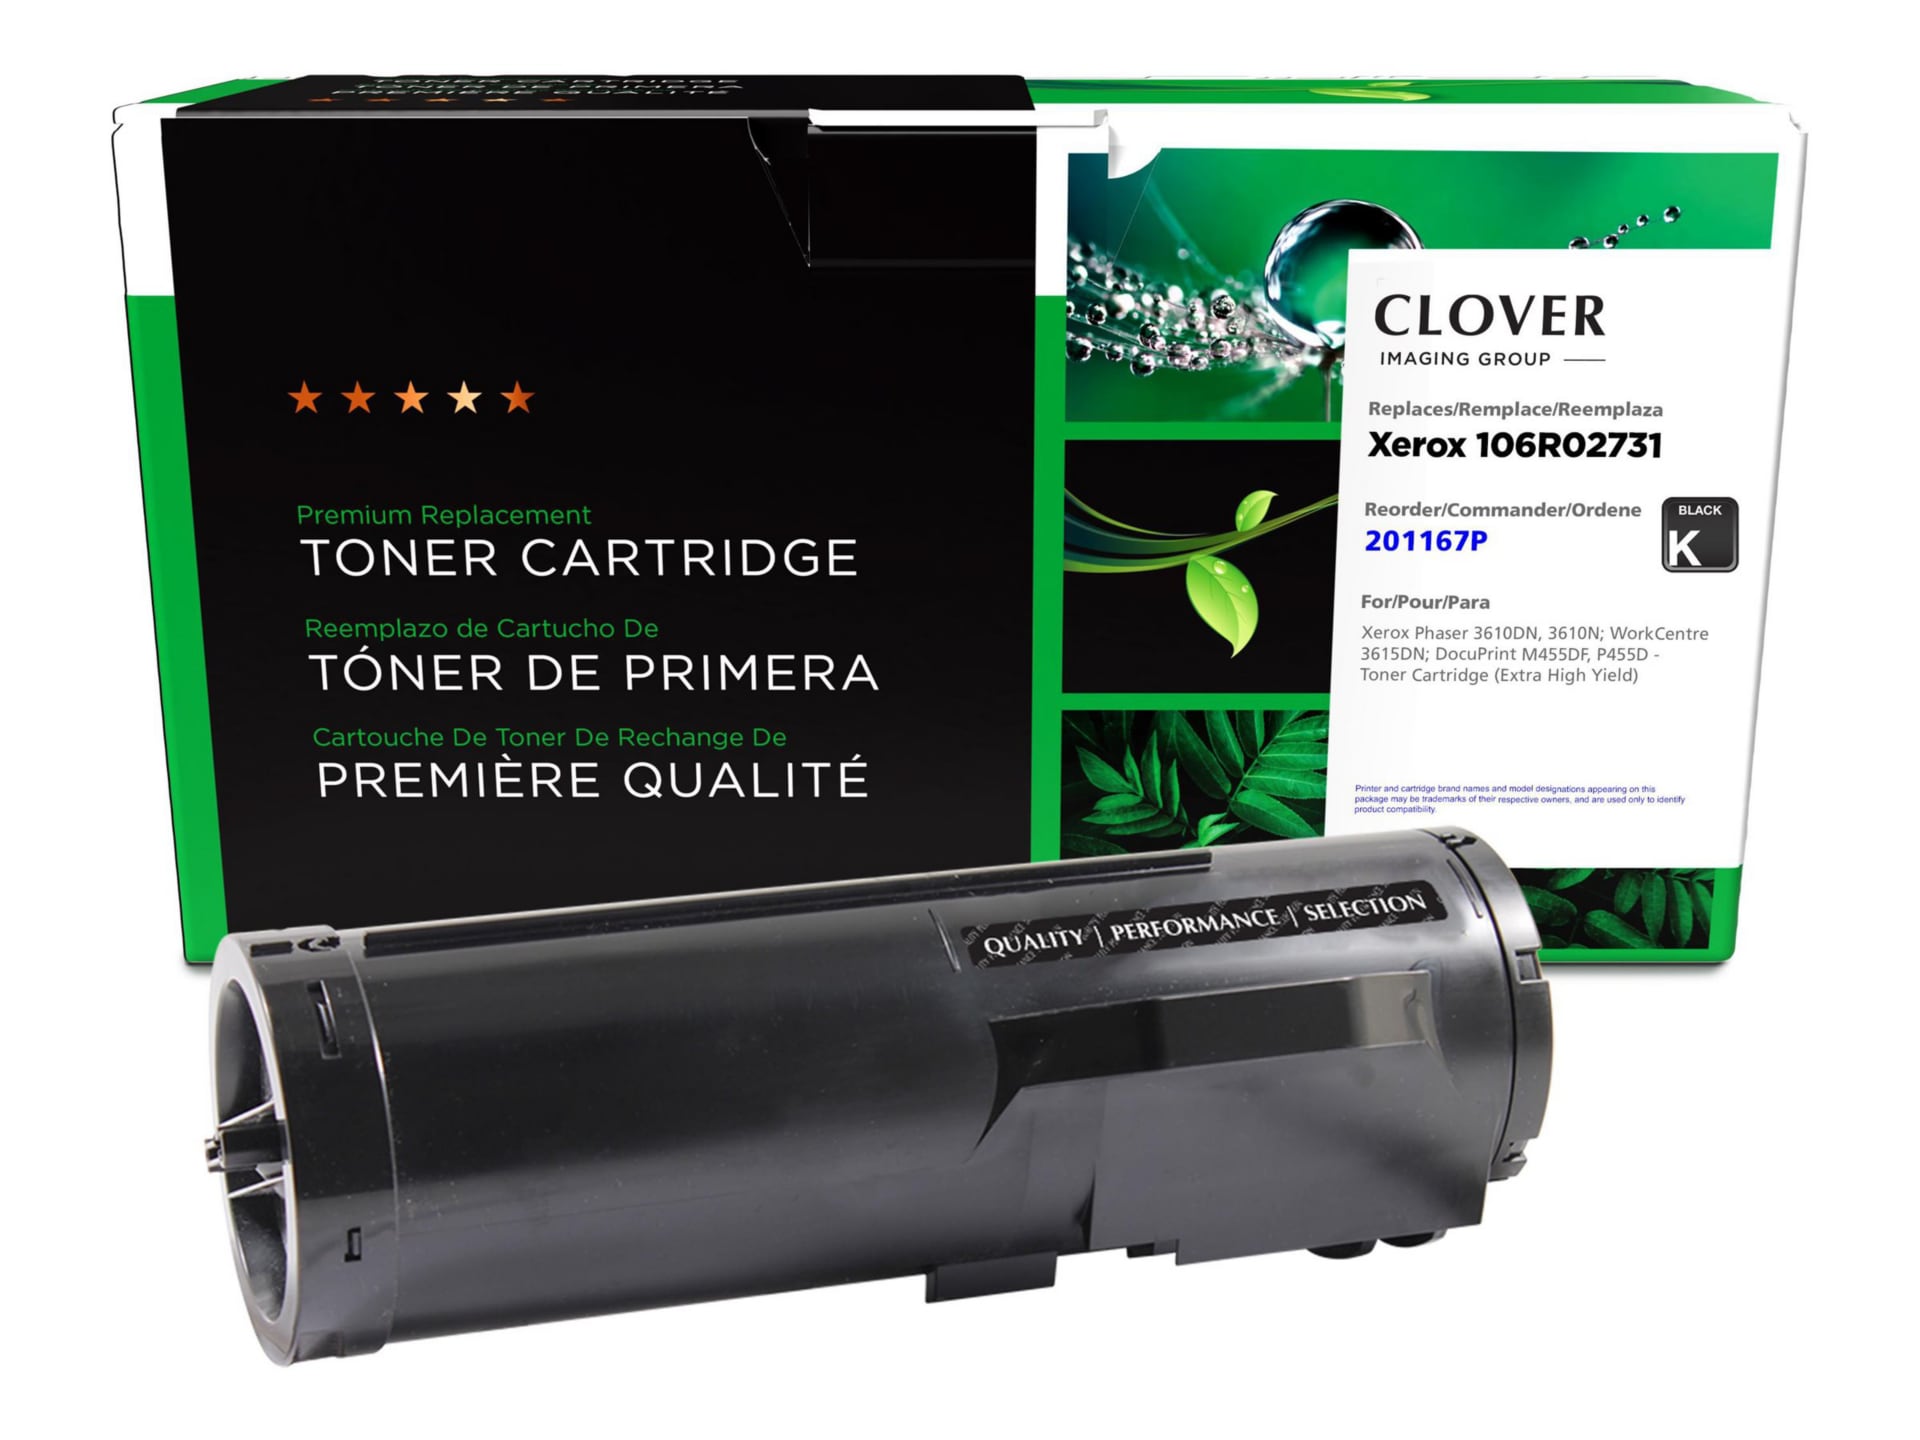 Clover Imaging Group - High Yield - black - compatible - remanufactured - toner cartridge (alternative for: Xerox